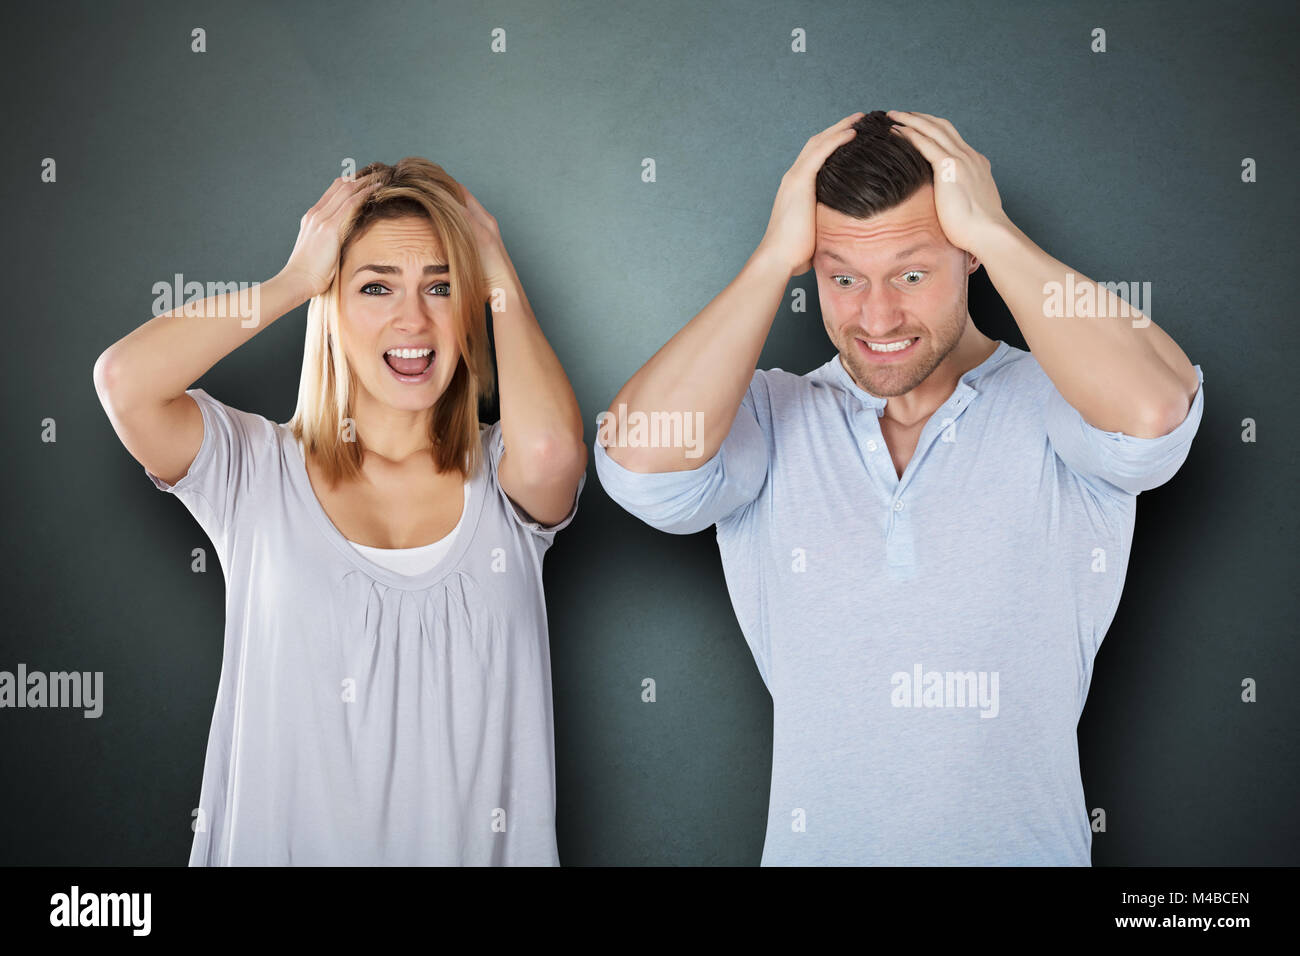 Portrait Of A Young Frustrated Couple Against Grey Background Stock Photo